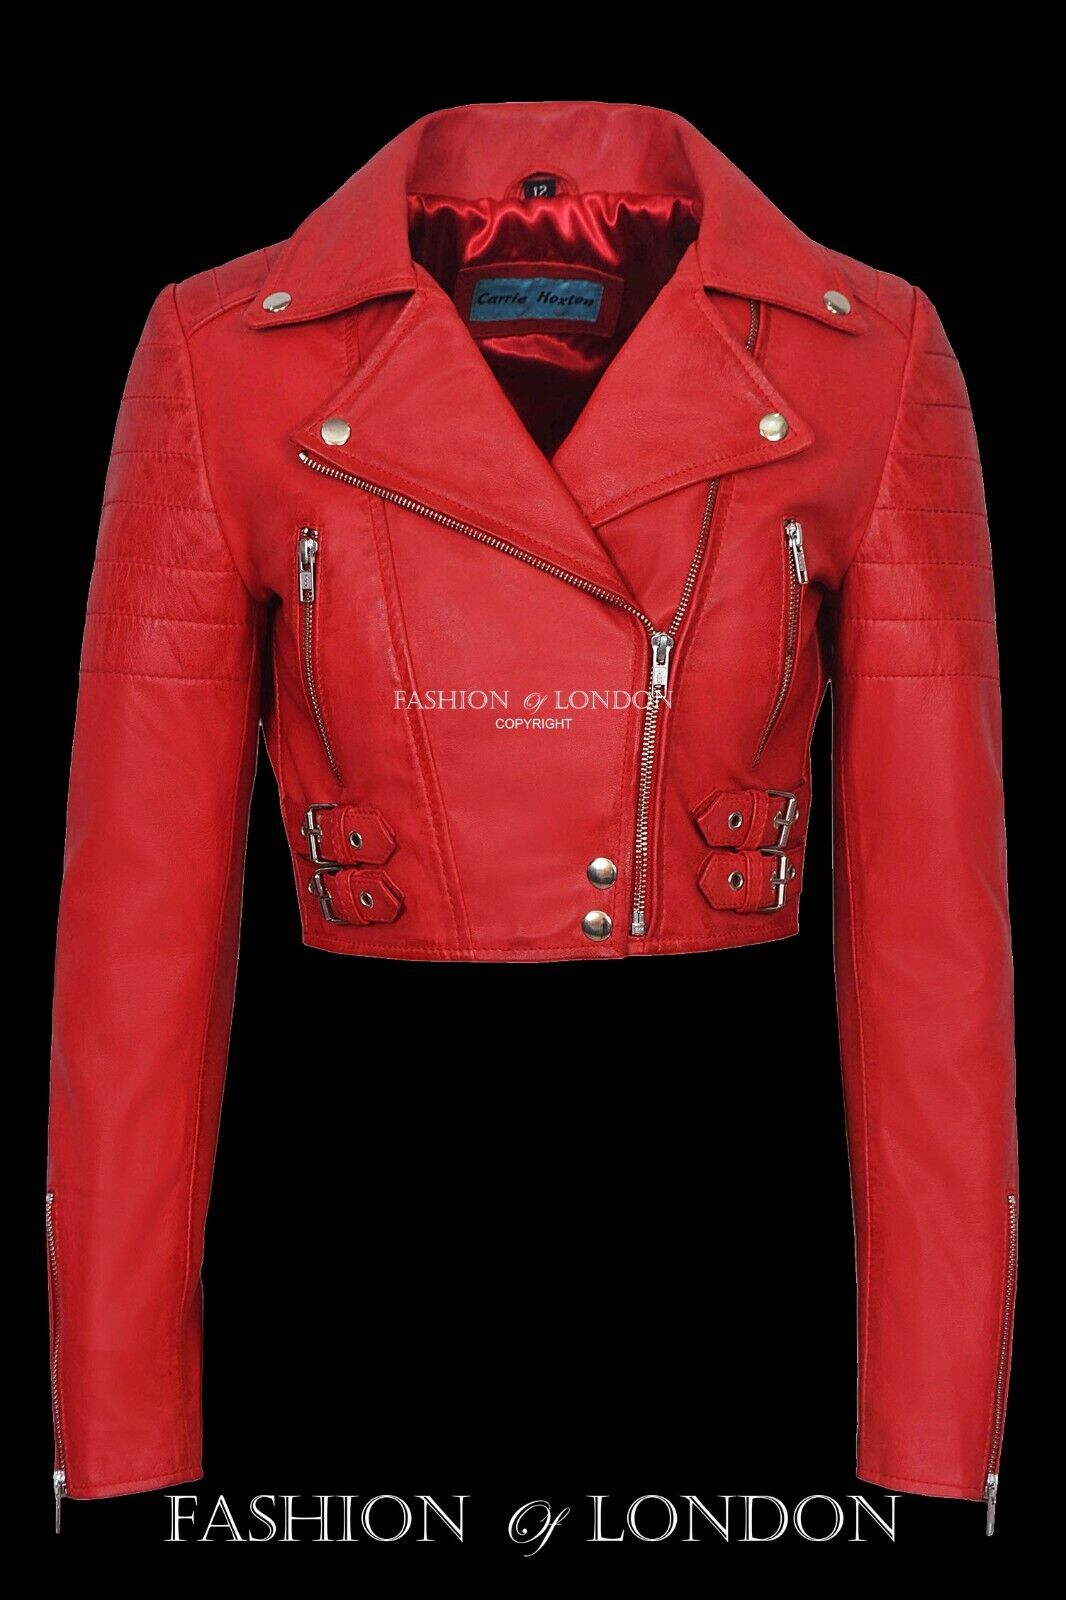 PROVOCATIVE Cropped Ladies Leather Jacket Red Biker Rock Style Short Jacket  5625